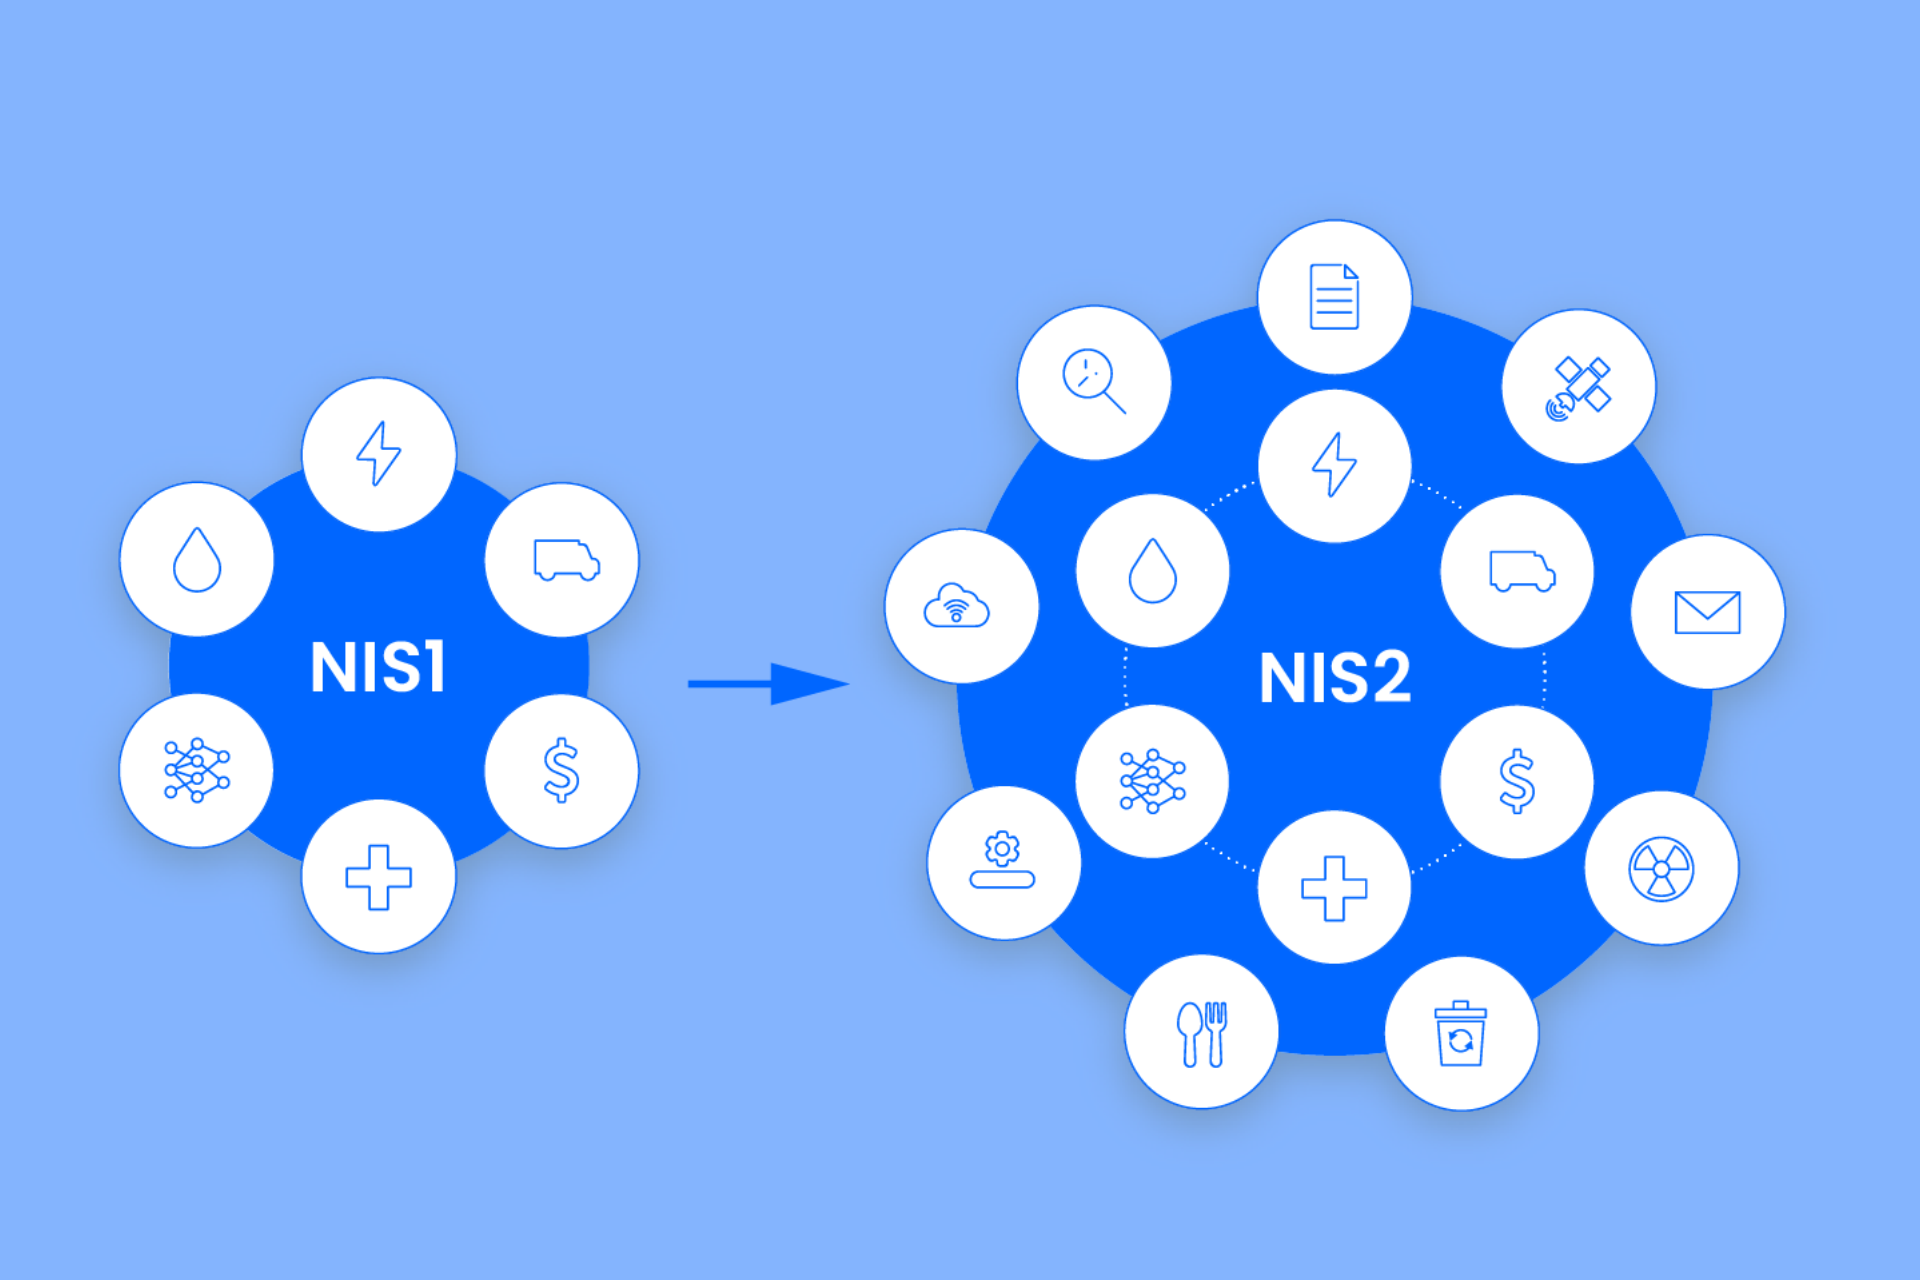 Microsoft issues a guide for NIS2 compliance